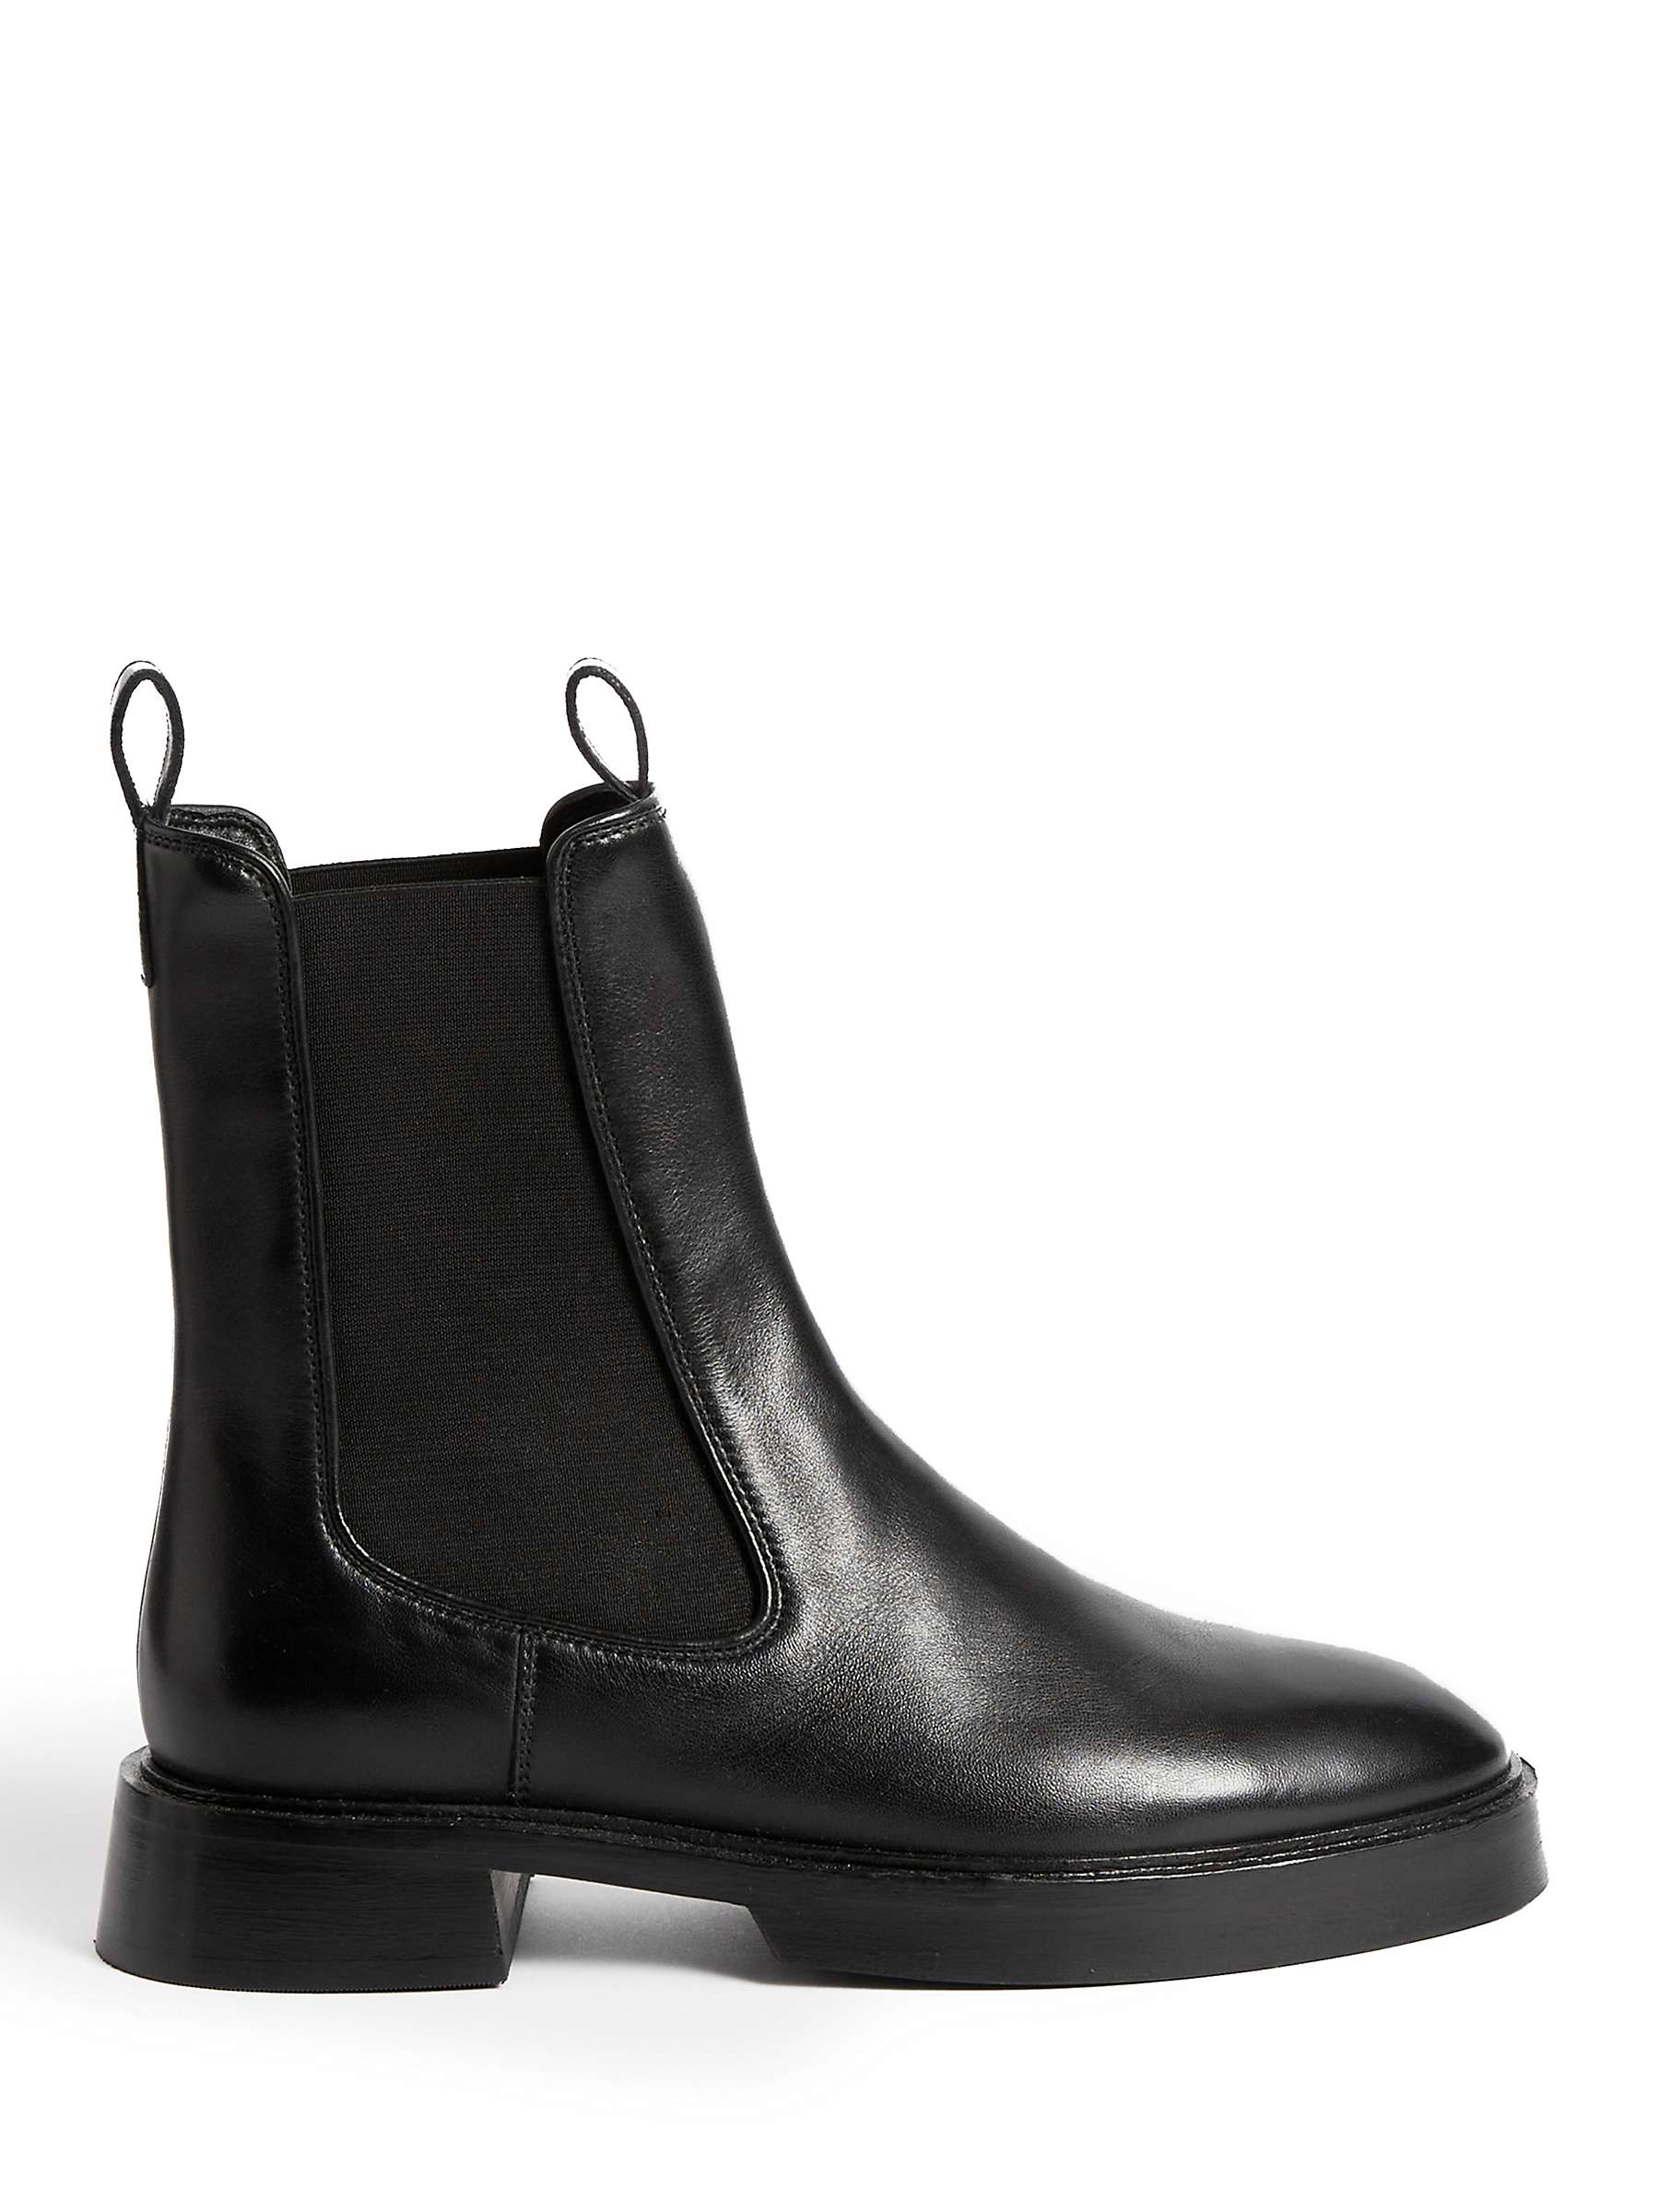 Buy Jigsaw Leather Chelsea Boots, Black Online at johnlewis.com